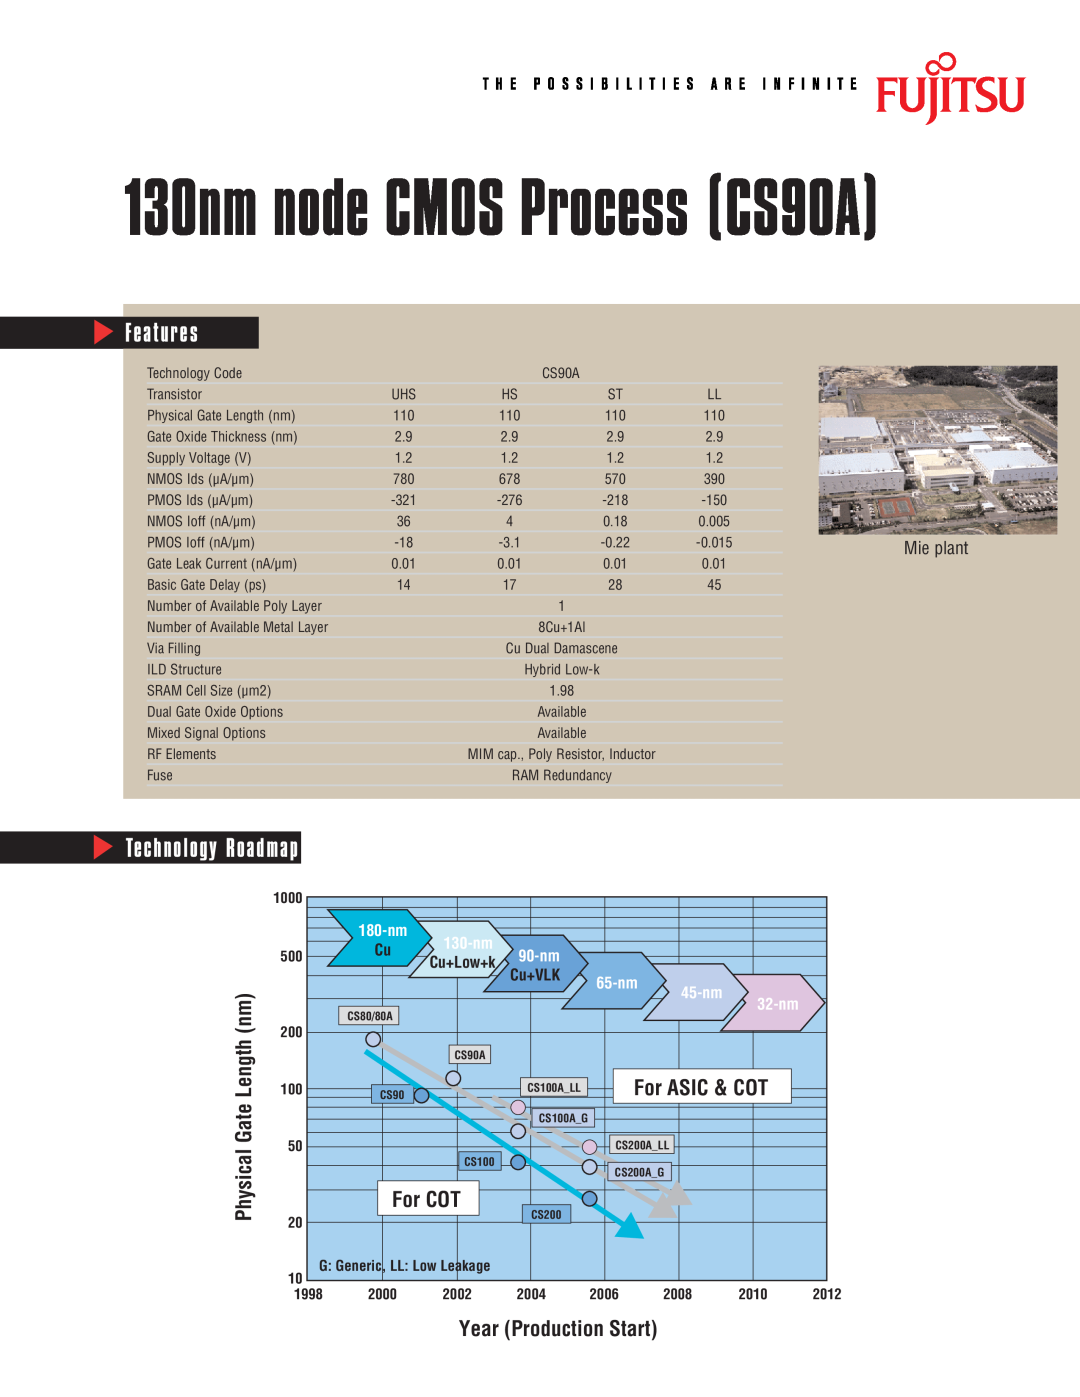 Fujitsu manual Mie plant, 130nm node CMOS Process CS90A, Features, Technology Roadmap, For COT, Year Production Start 